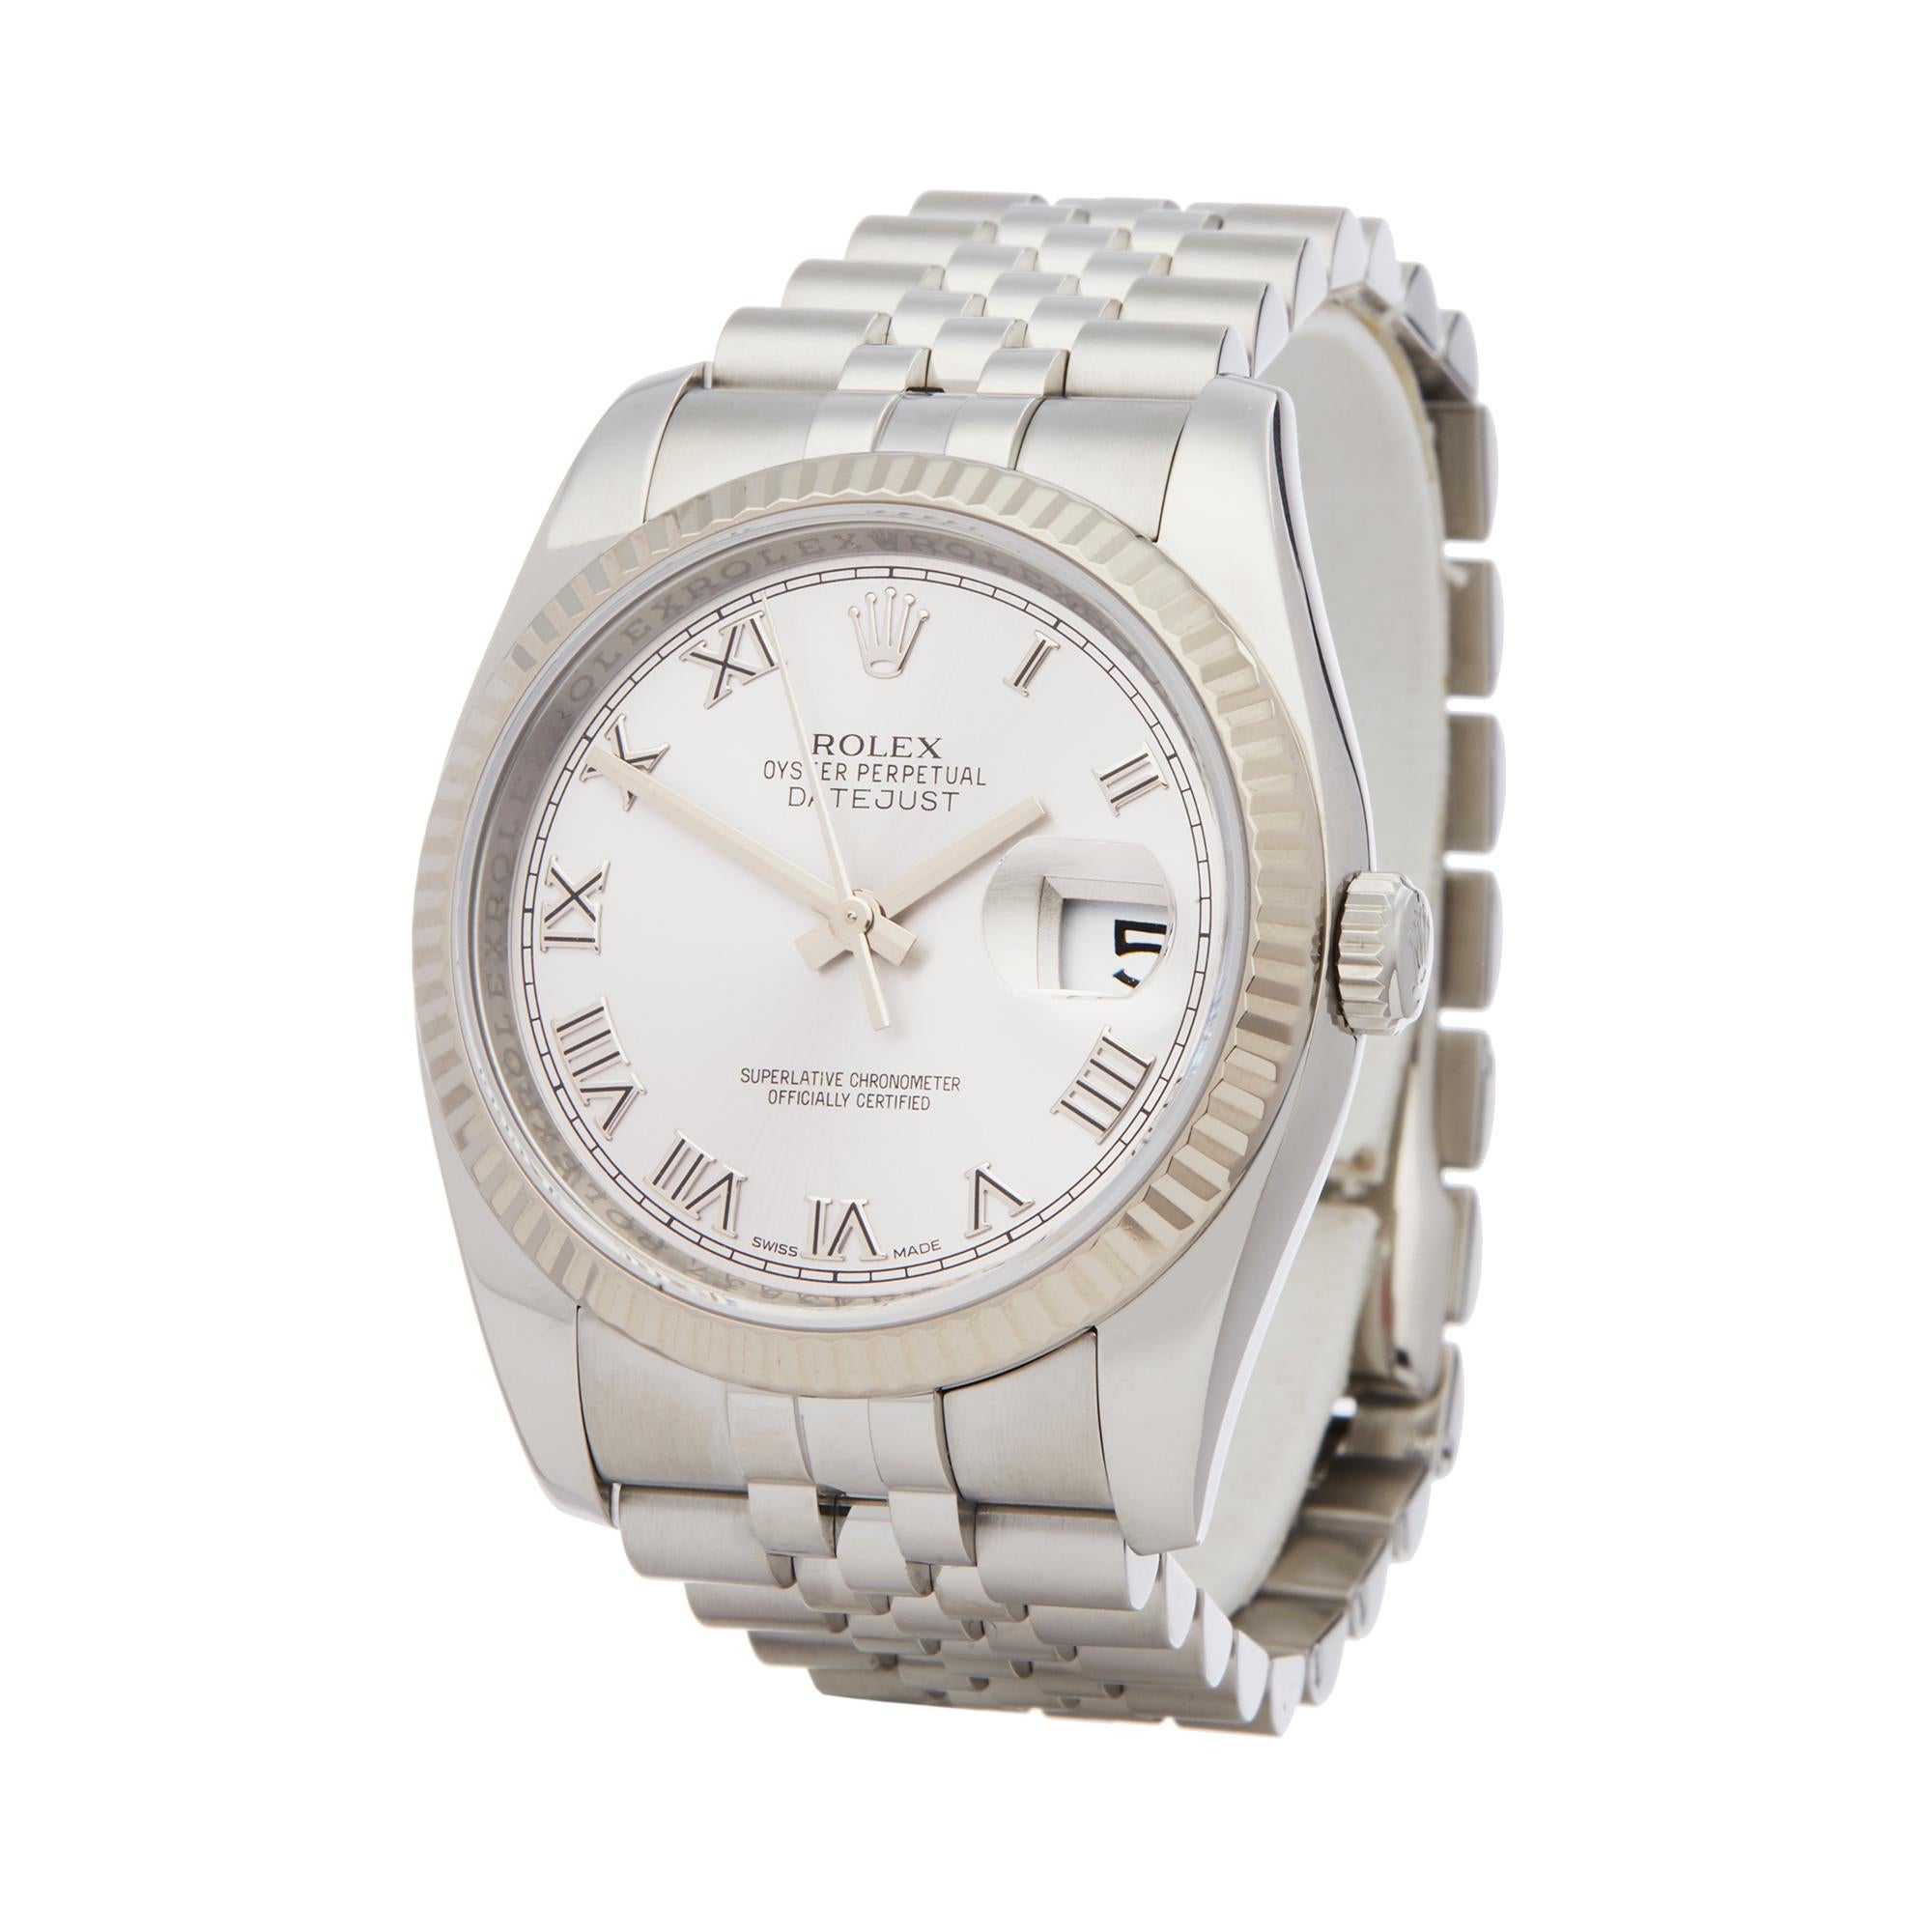 Ref: W6222
Manufacturer: Rolex
Model: DateJust
Model Ref: 116234
Age: 8th May 2014
Gender: Mens
Complete With: Box & Guarantee
Dial: Grey Roman
Glass: Sapphire Crystal
Movement: Automatic
Water Resistance: To Manufacturers Specifications
Case: